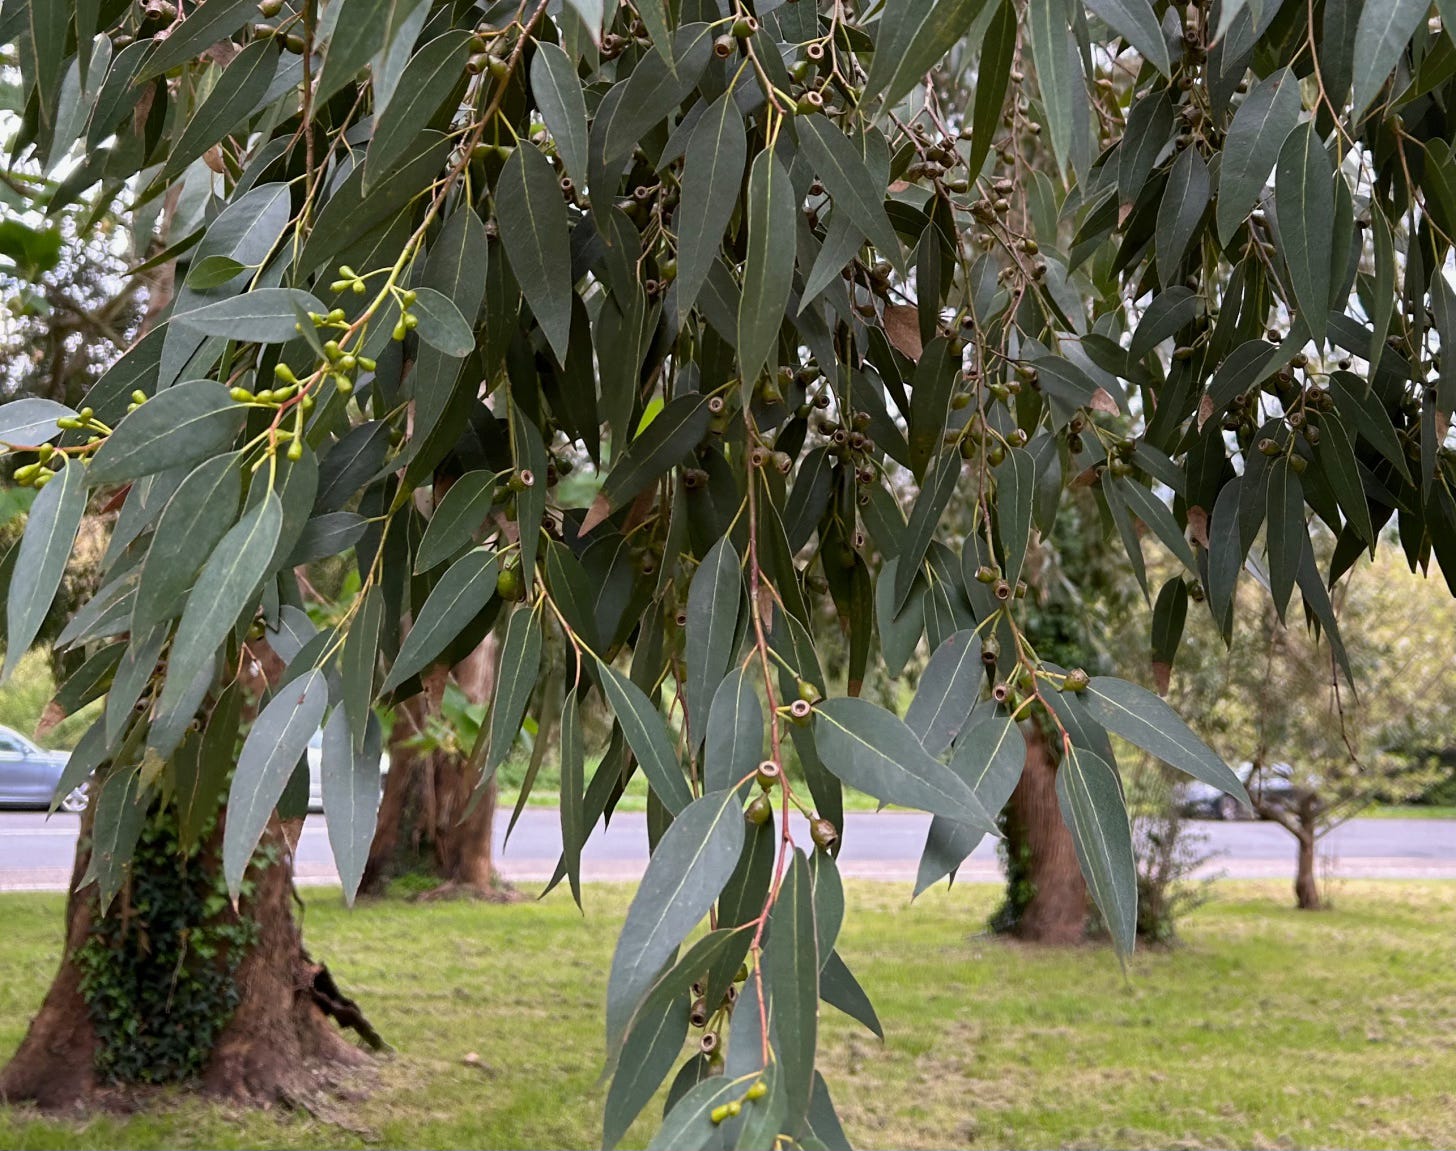 Dangling leaves and fruits of a eucalyptus tree